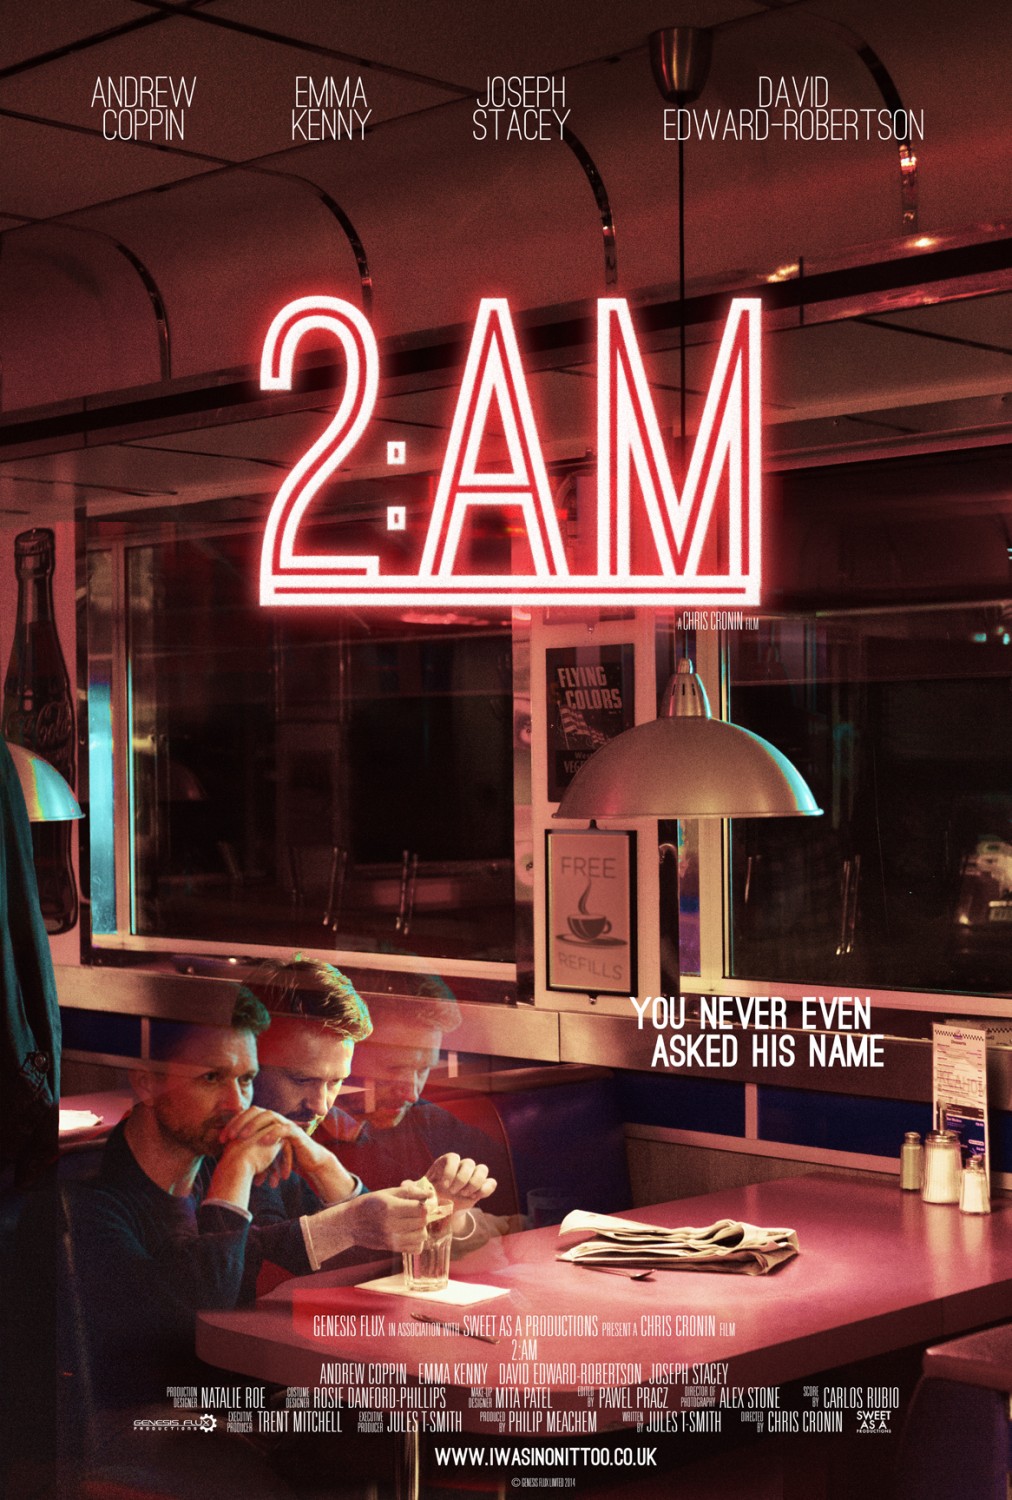 Extra Large Movie Poster Image for 2 A.M